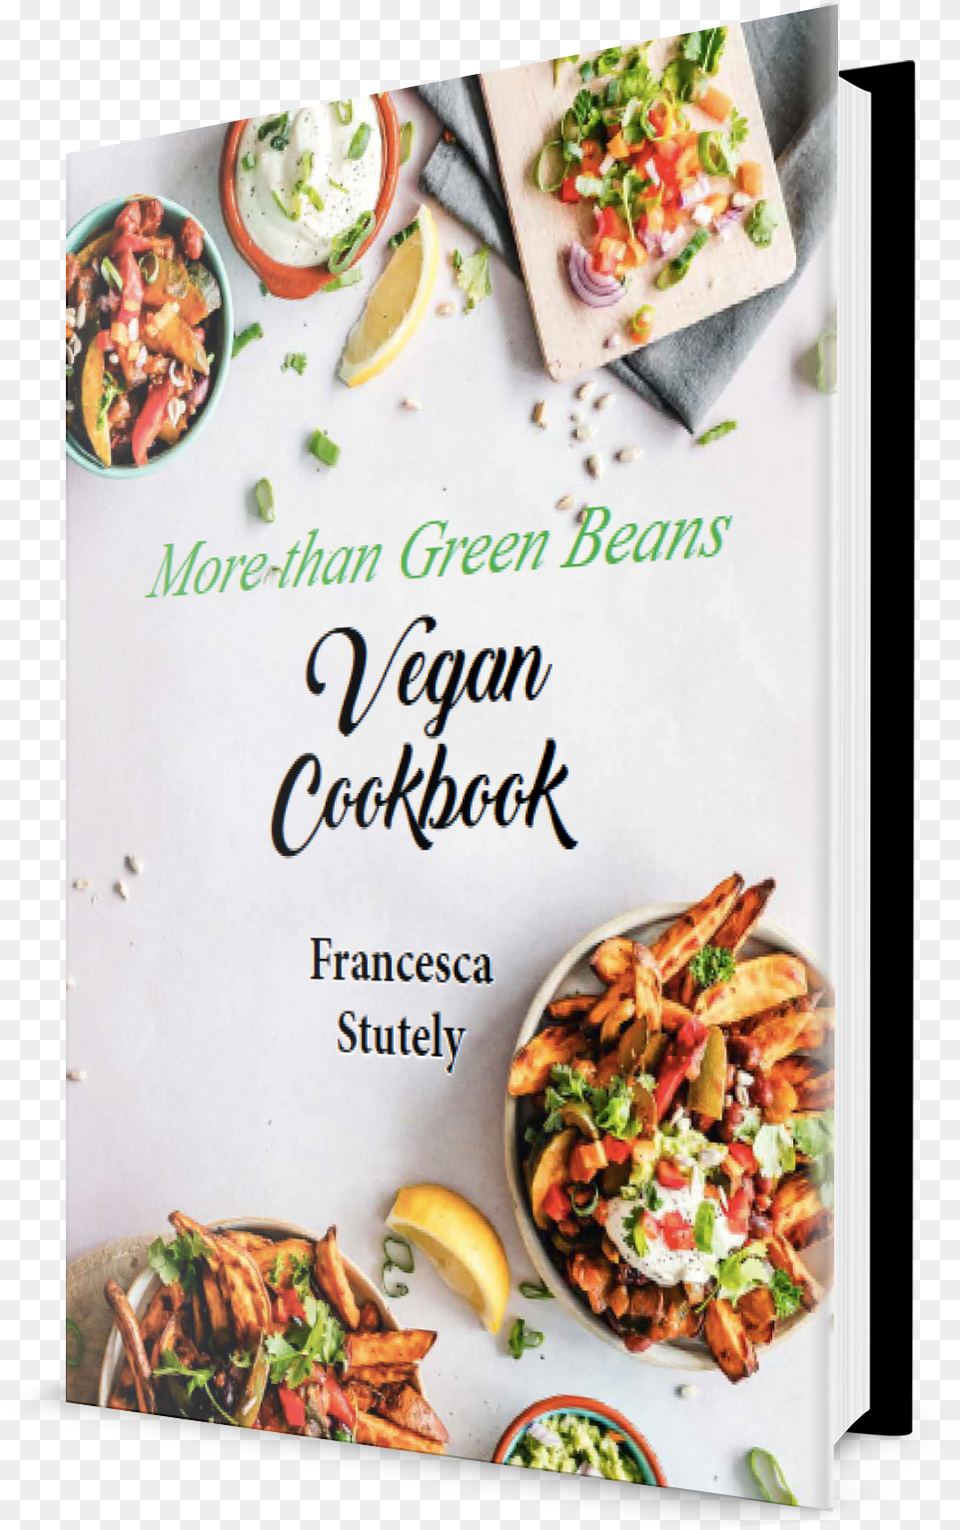 More Than Green Beans Vegan Cookbook Superfood, Food, Lunch, Meal, Advertisement Png